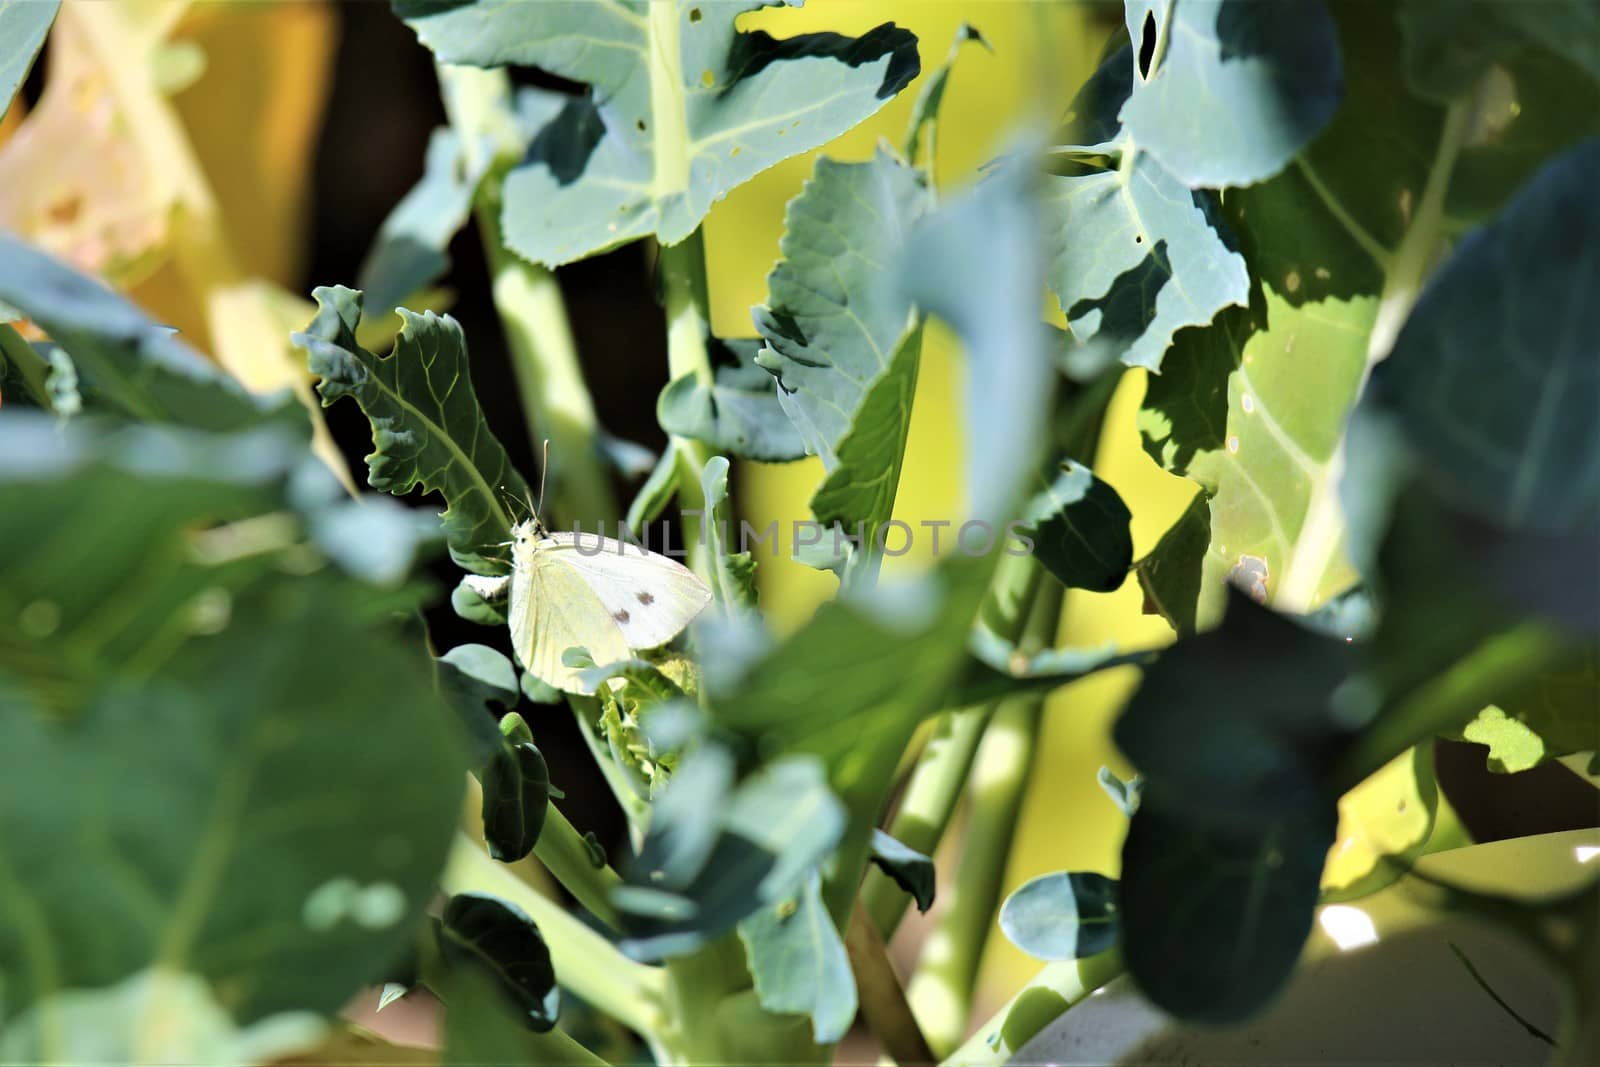 One cabbage white butterfly on a cabbage leaf